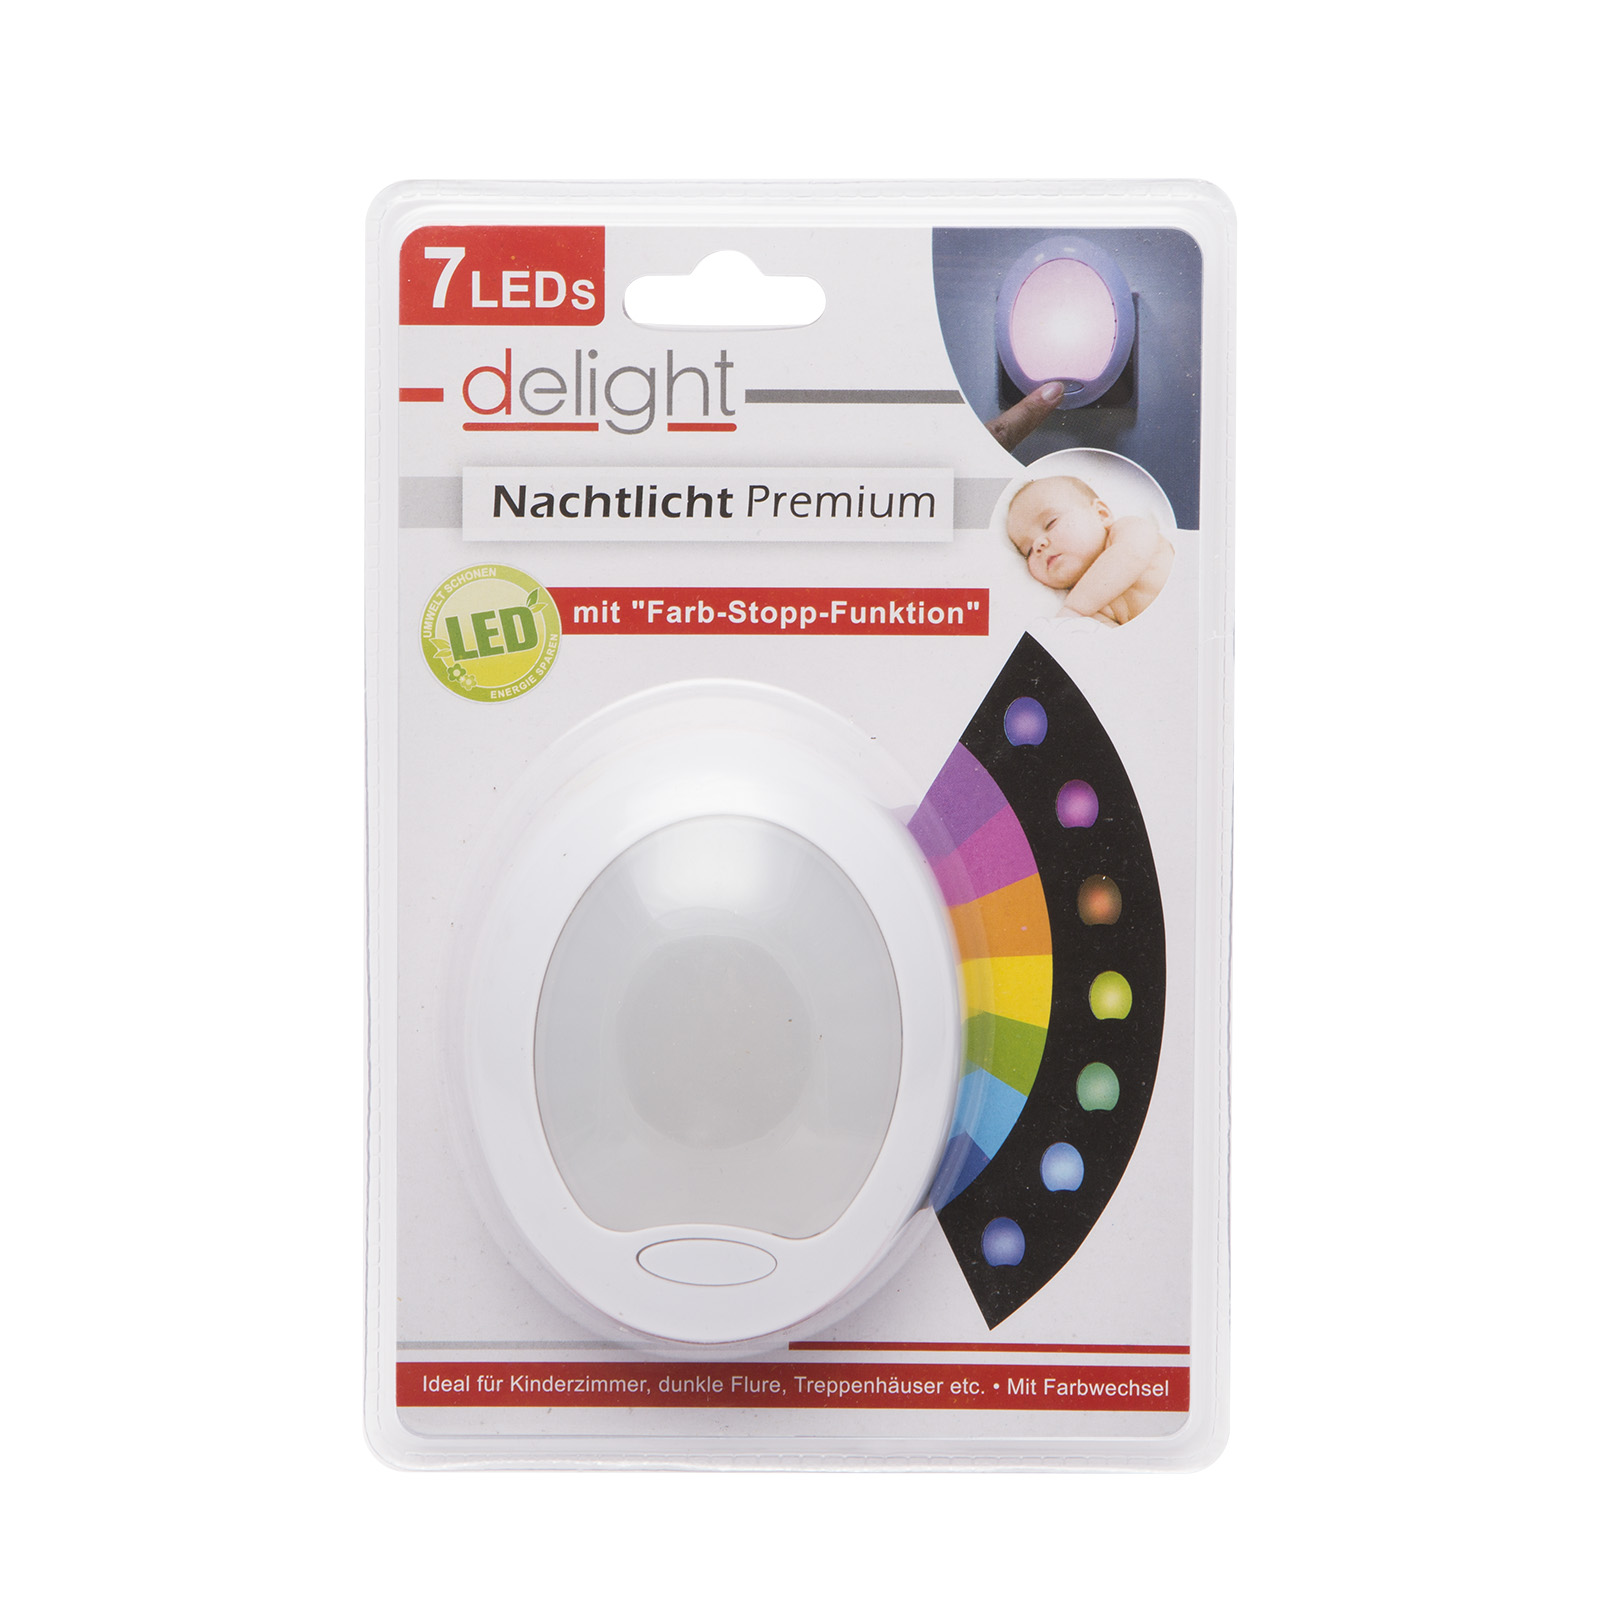 Night light, color changing - Premium "Smooth" - 7 LED thumb